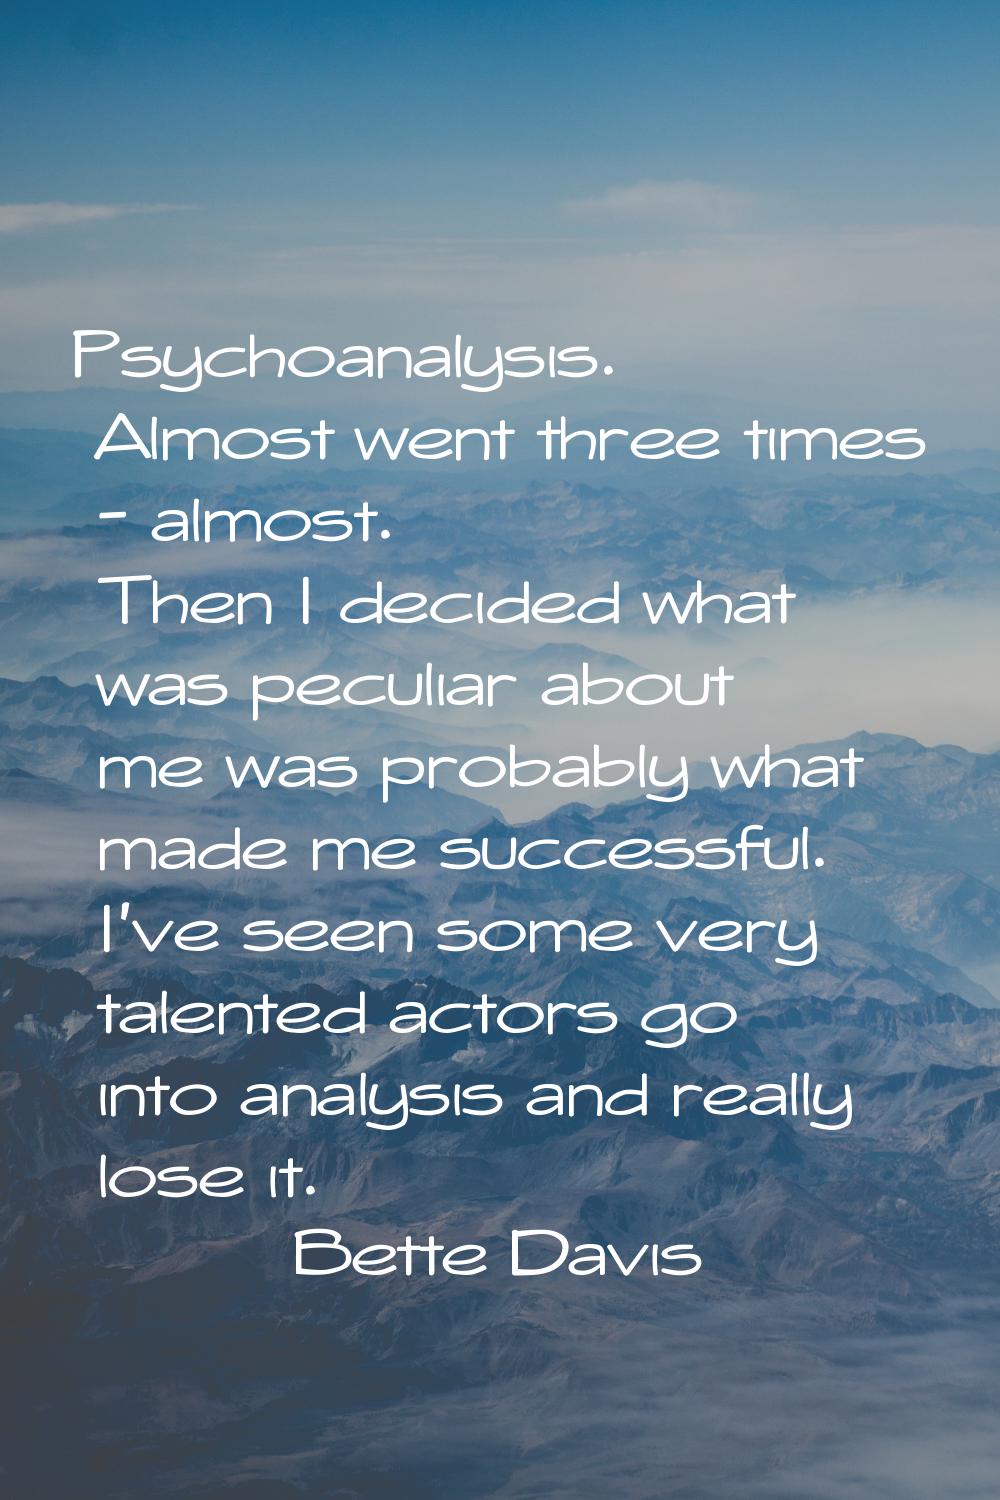 Psychoanalysis. Almost went three times - almost. Then I decided what was peculiar about me was pro